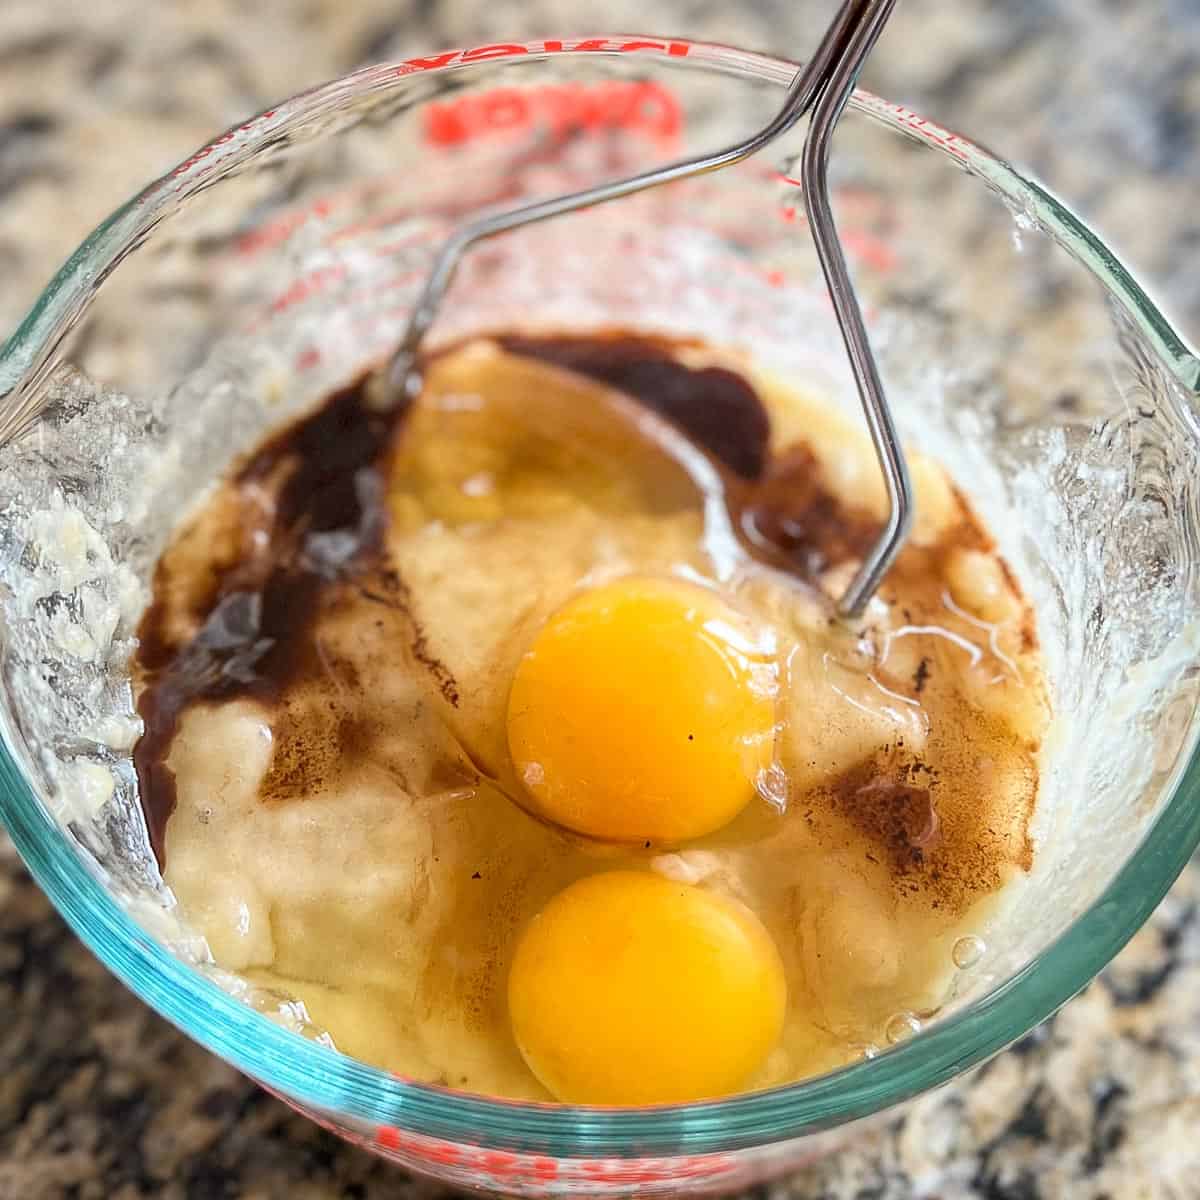 Mashed bananas with two cracked eggs and vanilla extract in a glass measuring cup with a masher.